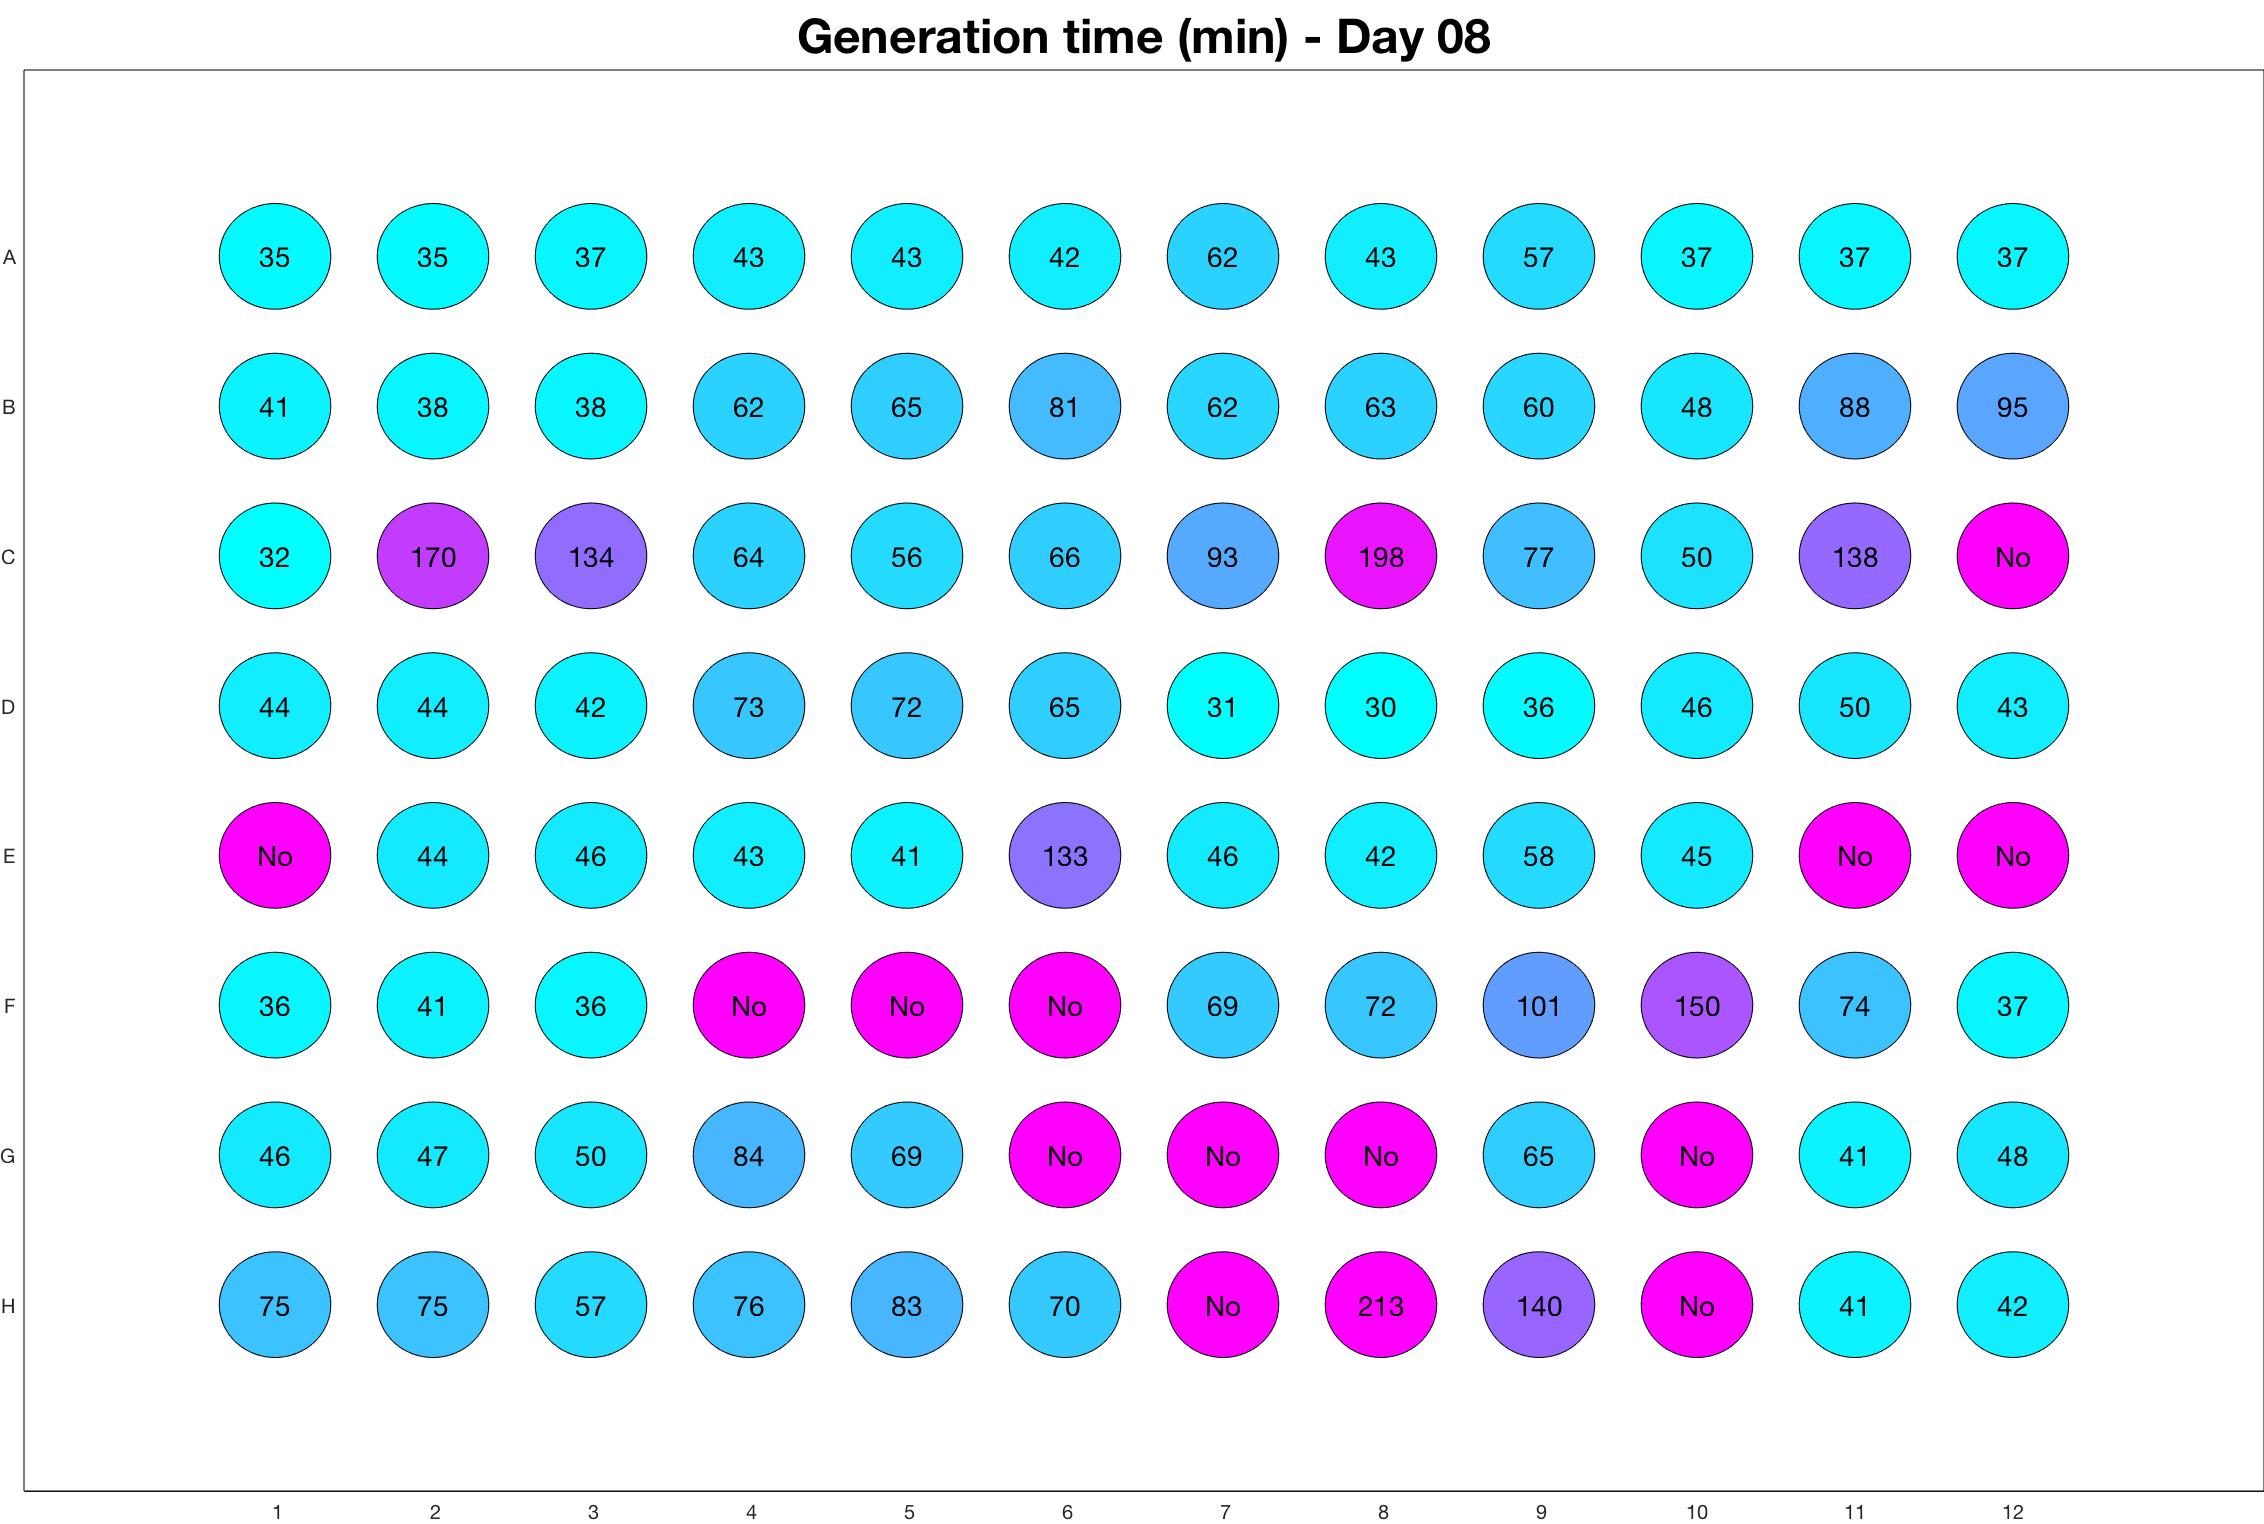 Generation time for day - 8.jpg